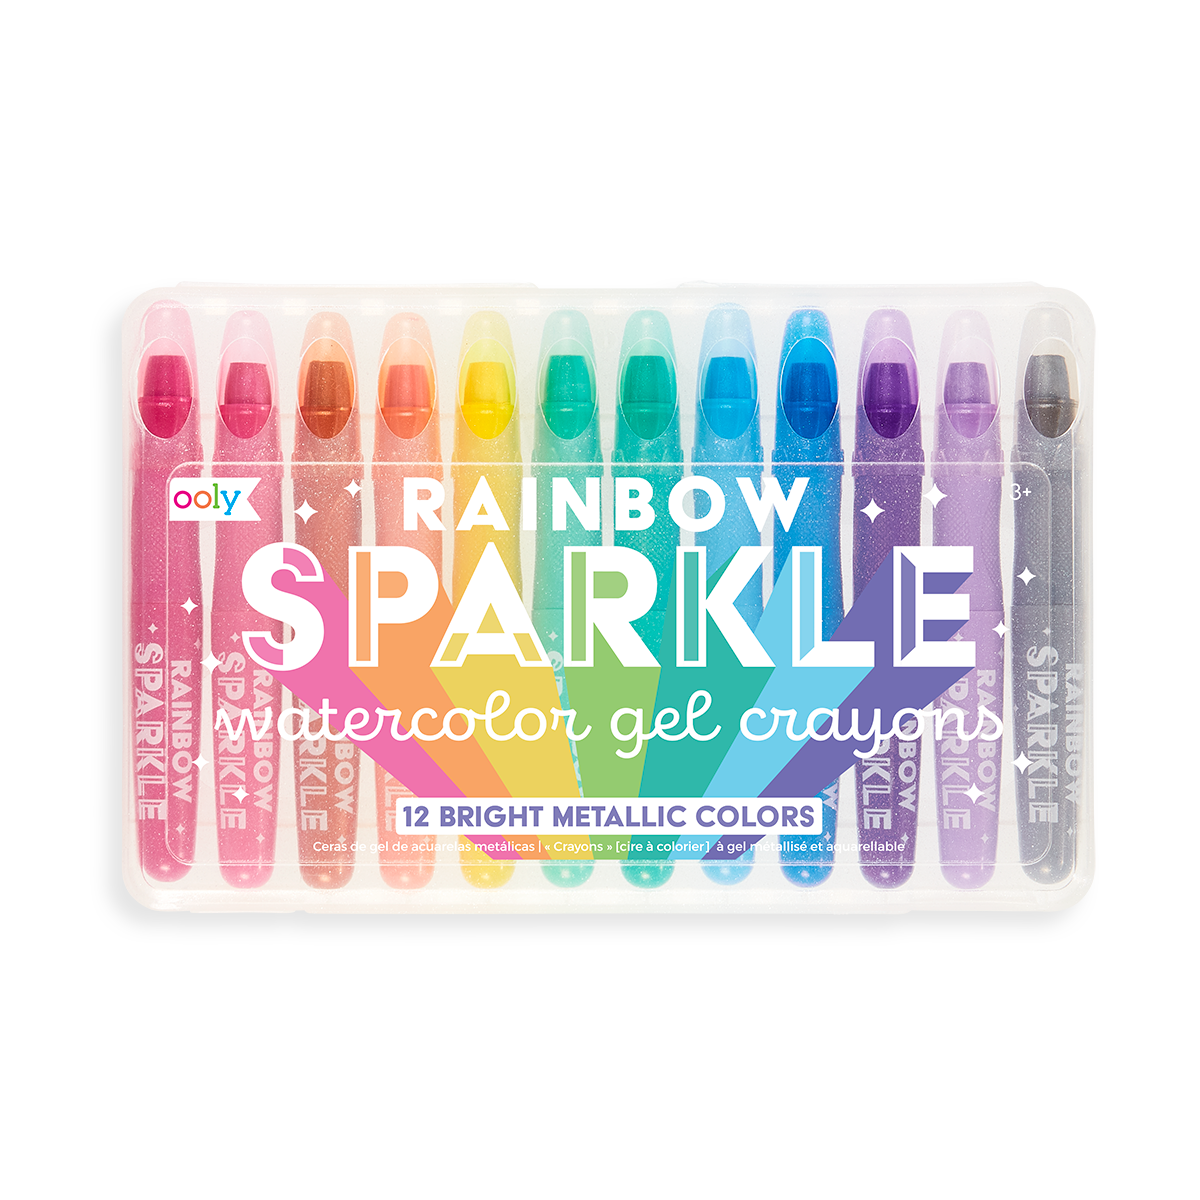 http://www.ooly.com/cdn/shop/products/133-57-Rainbow-Sparkle-Watercolor-Gel-Crayon-B1.png?v=1574543261&width=2048